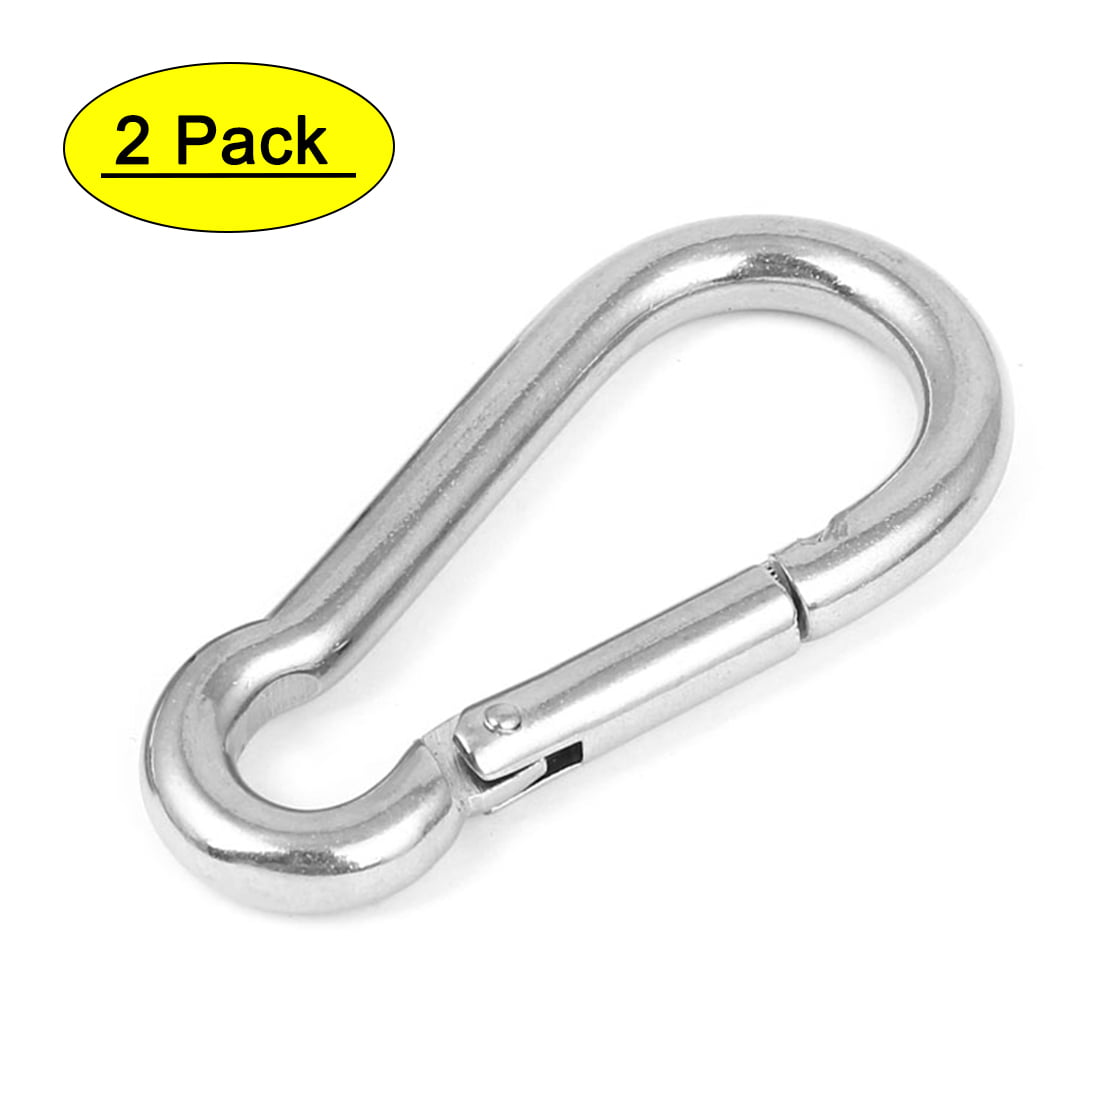 8mm STAINLESS STEEL 316 SNAP HOOK SAFETY CLIP CARABINER CLIMBING LOCK DEF 